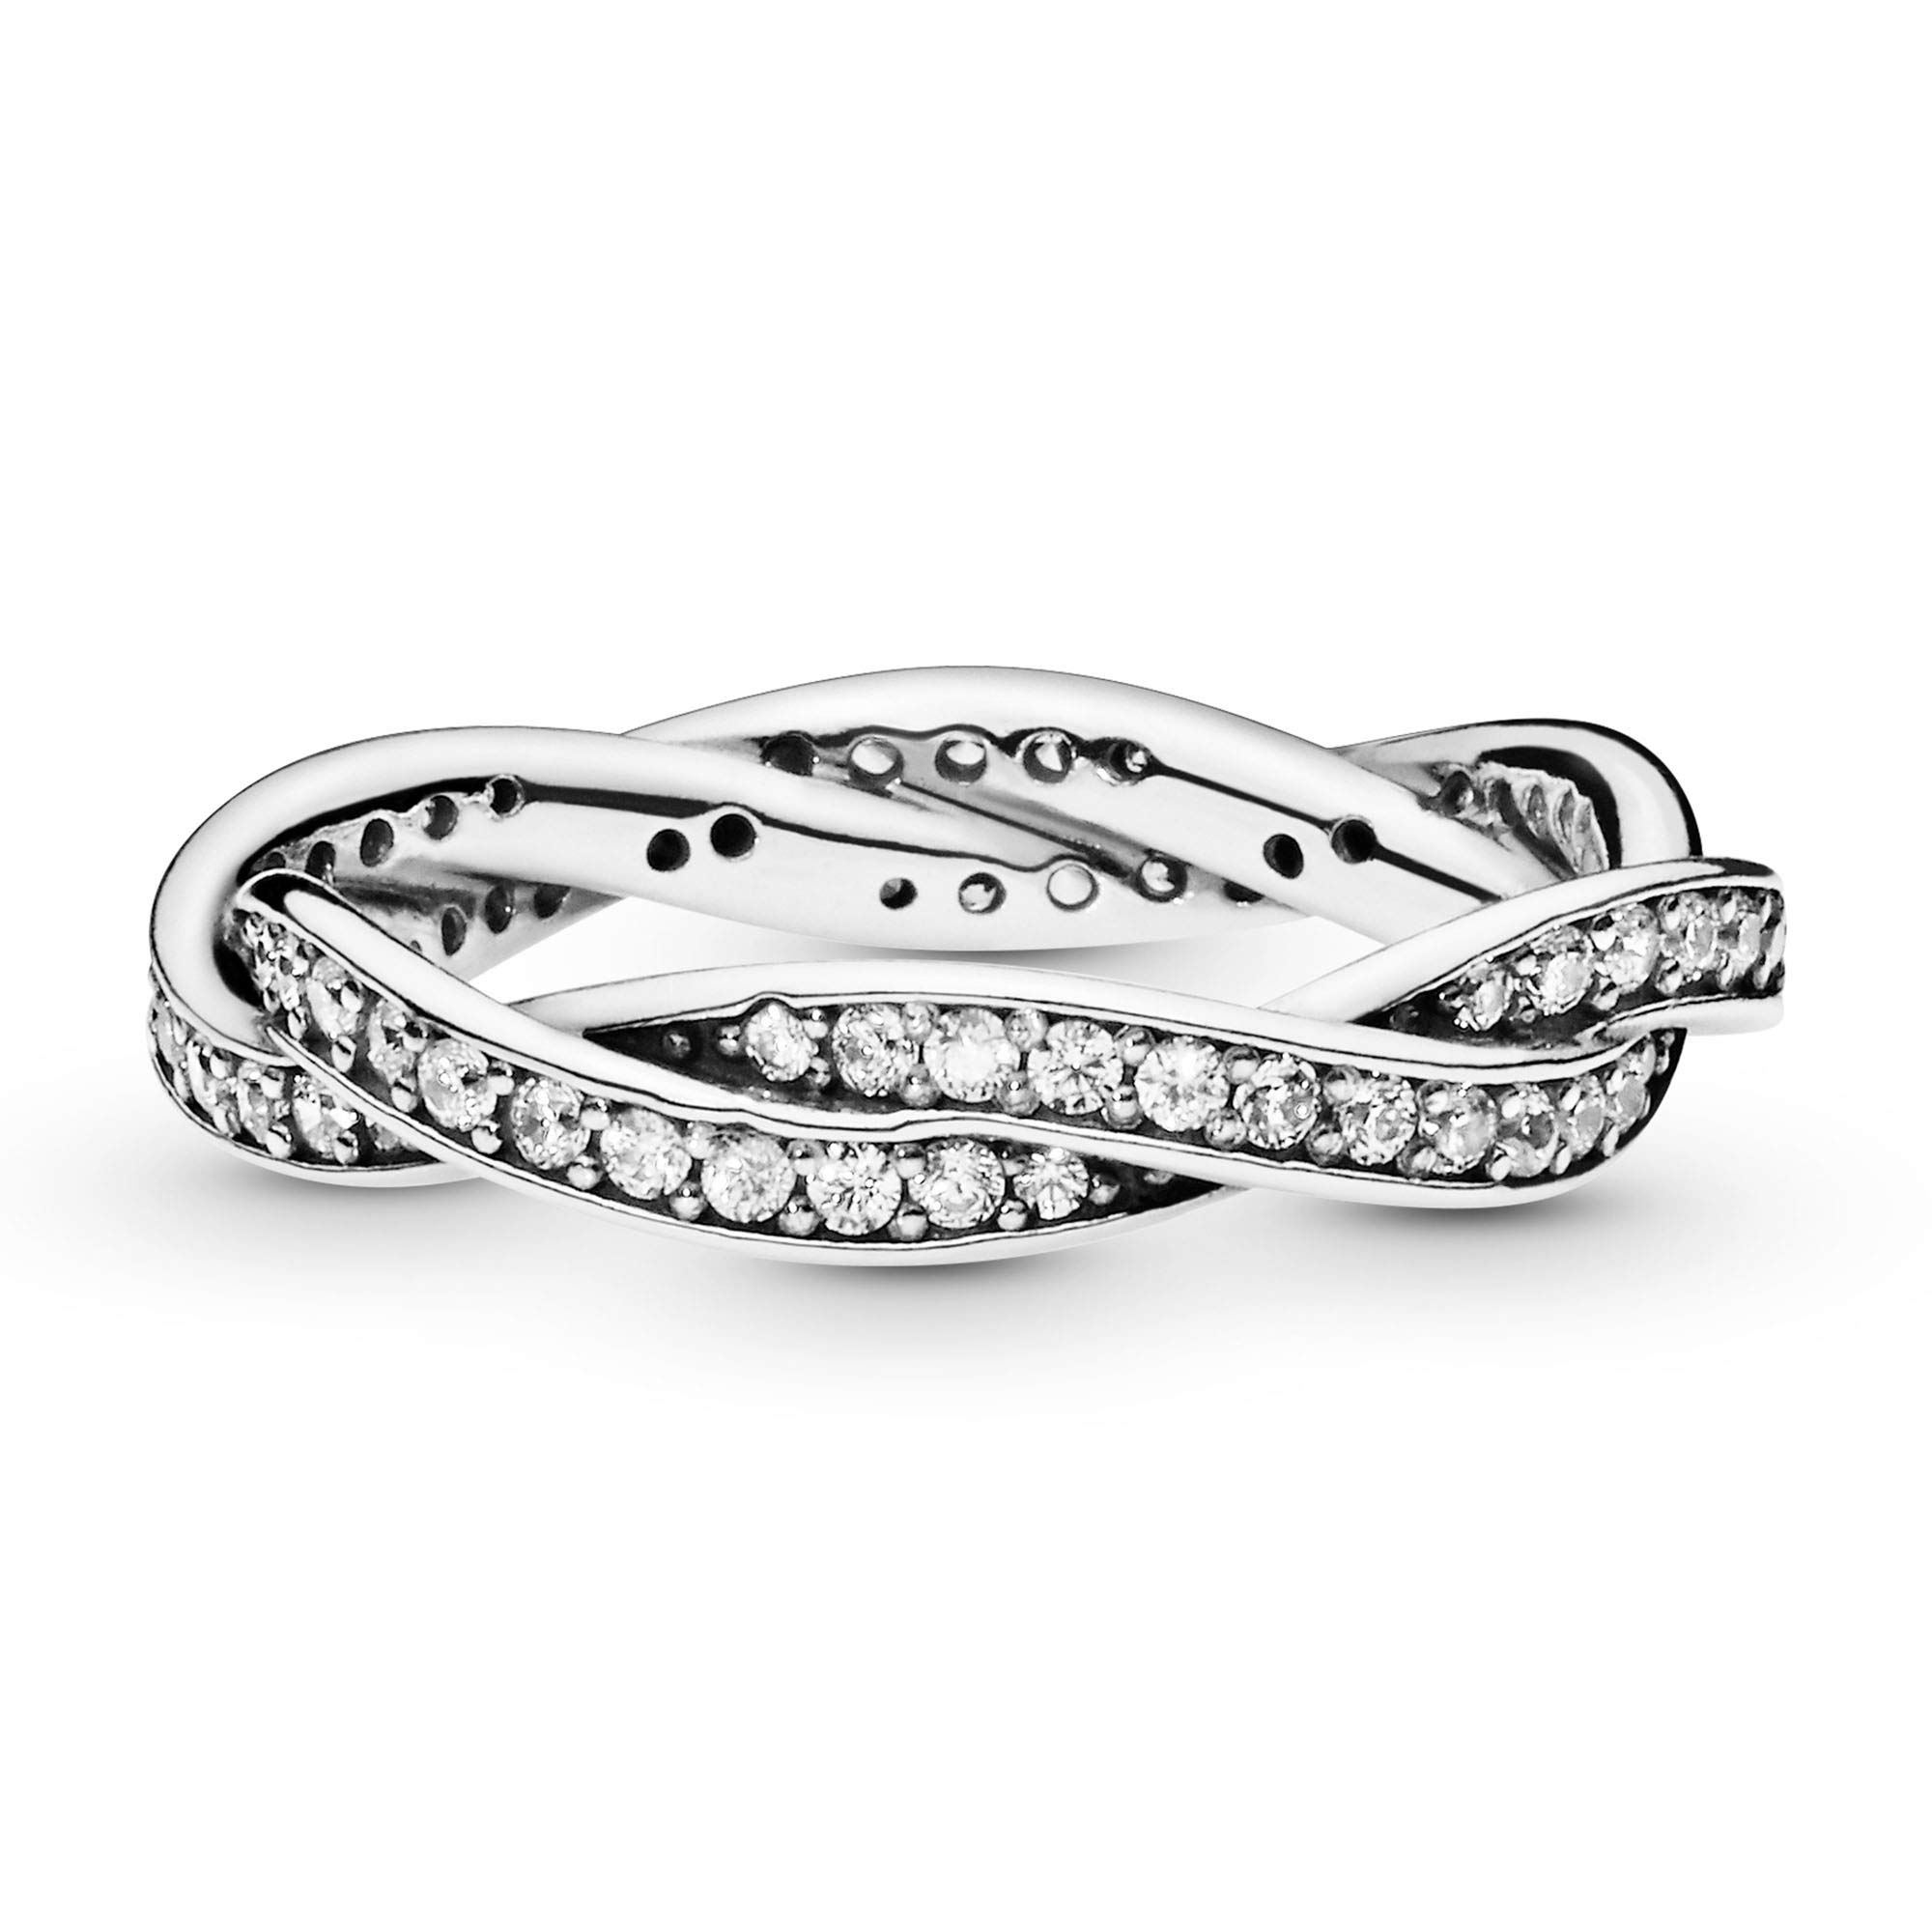 PANDORA Jewelry Twist of Fate Cubic Zirconia Ring in Sterling Silver